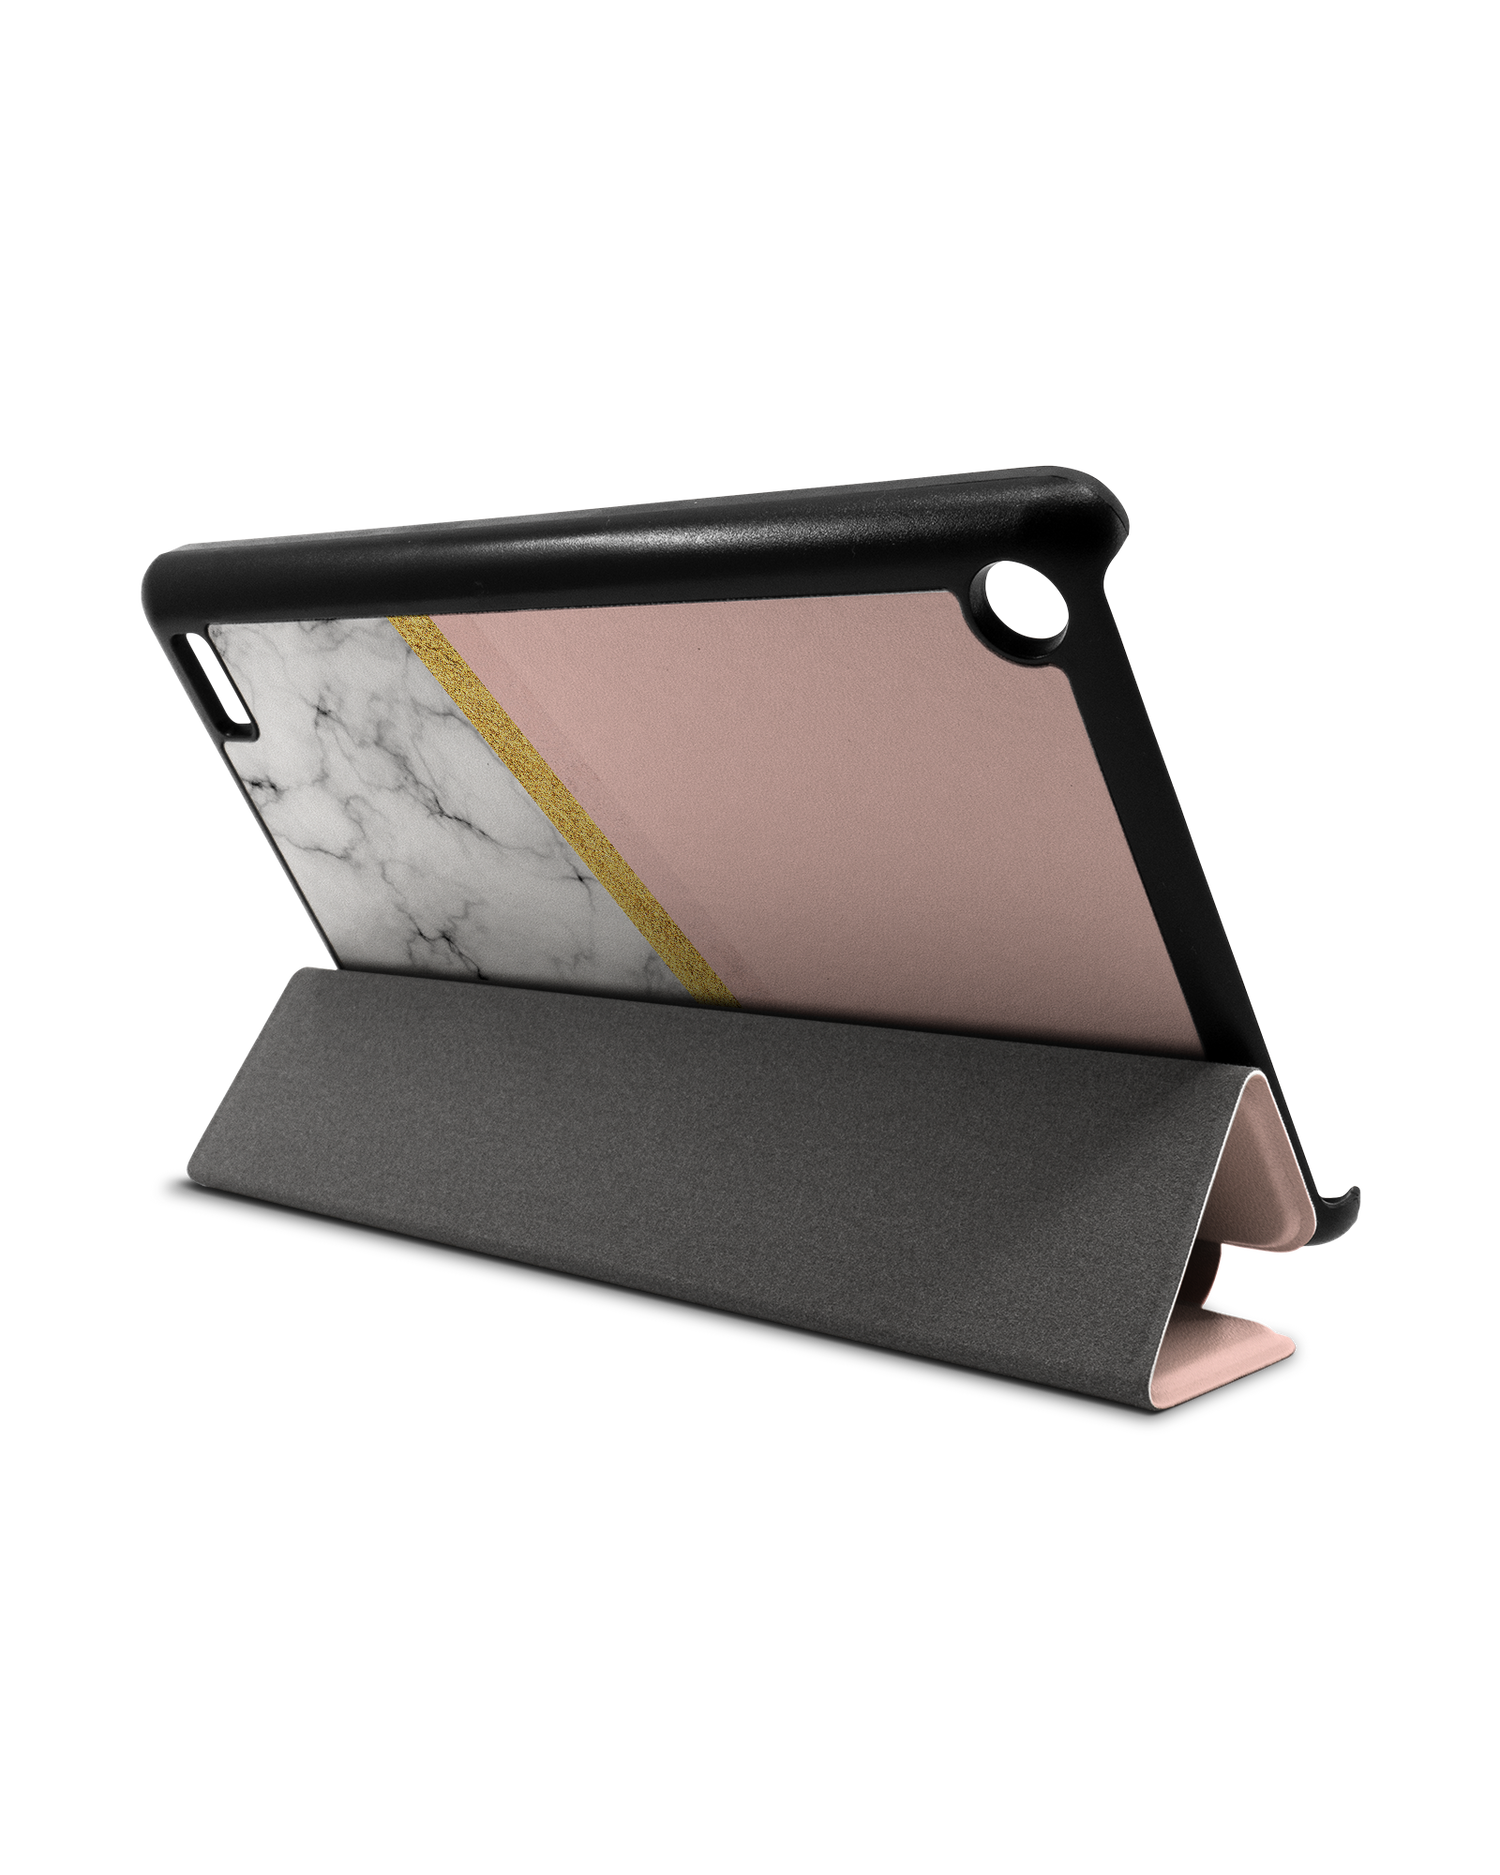 Marble Slice Tablet Smart Case for Amazon Fire 7: Used as Stand